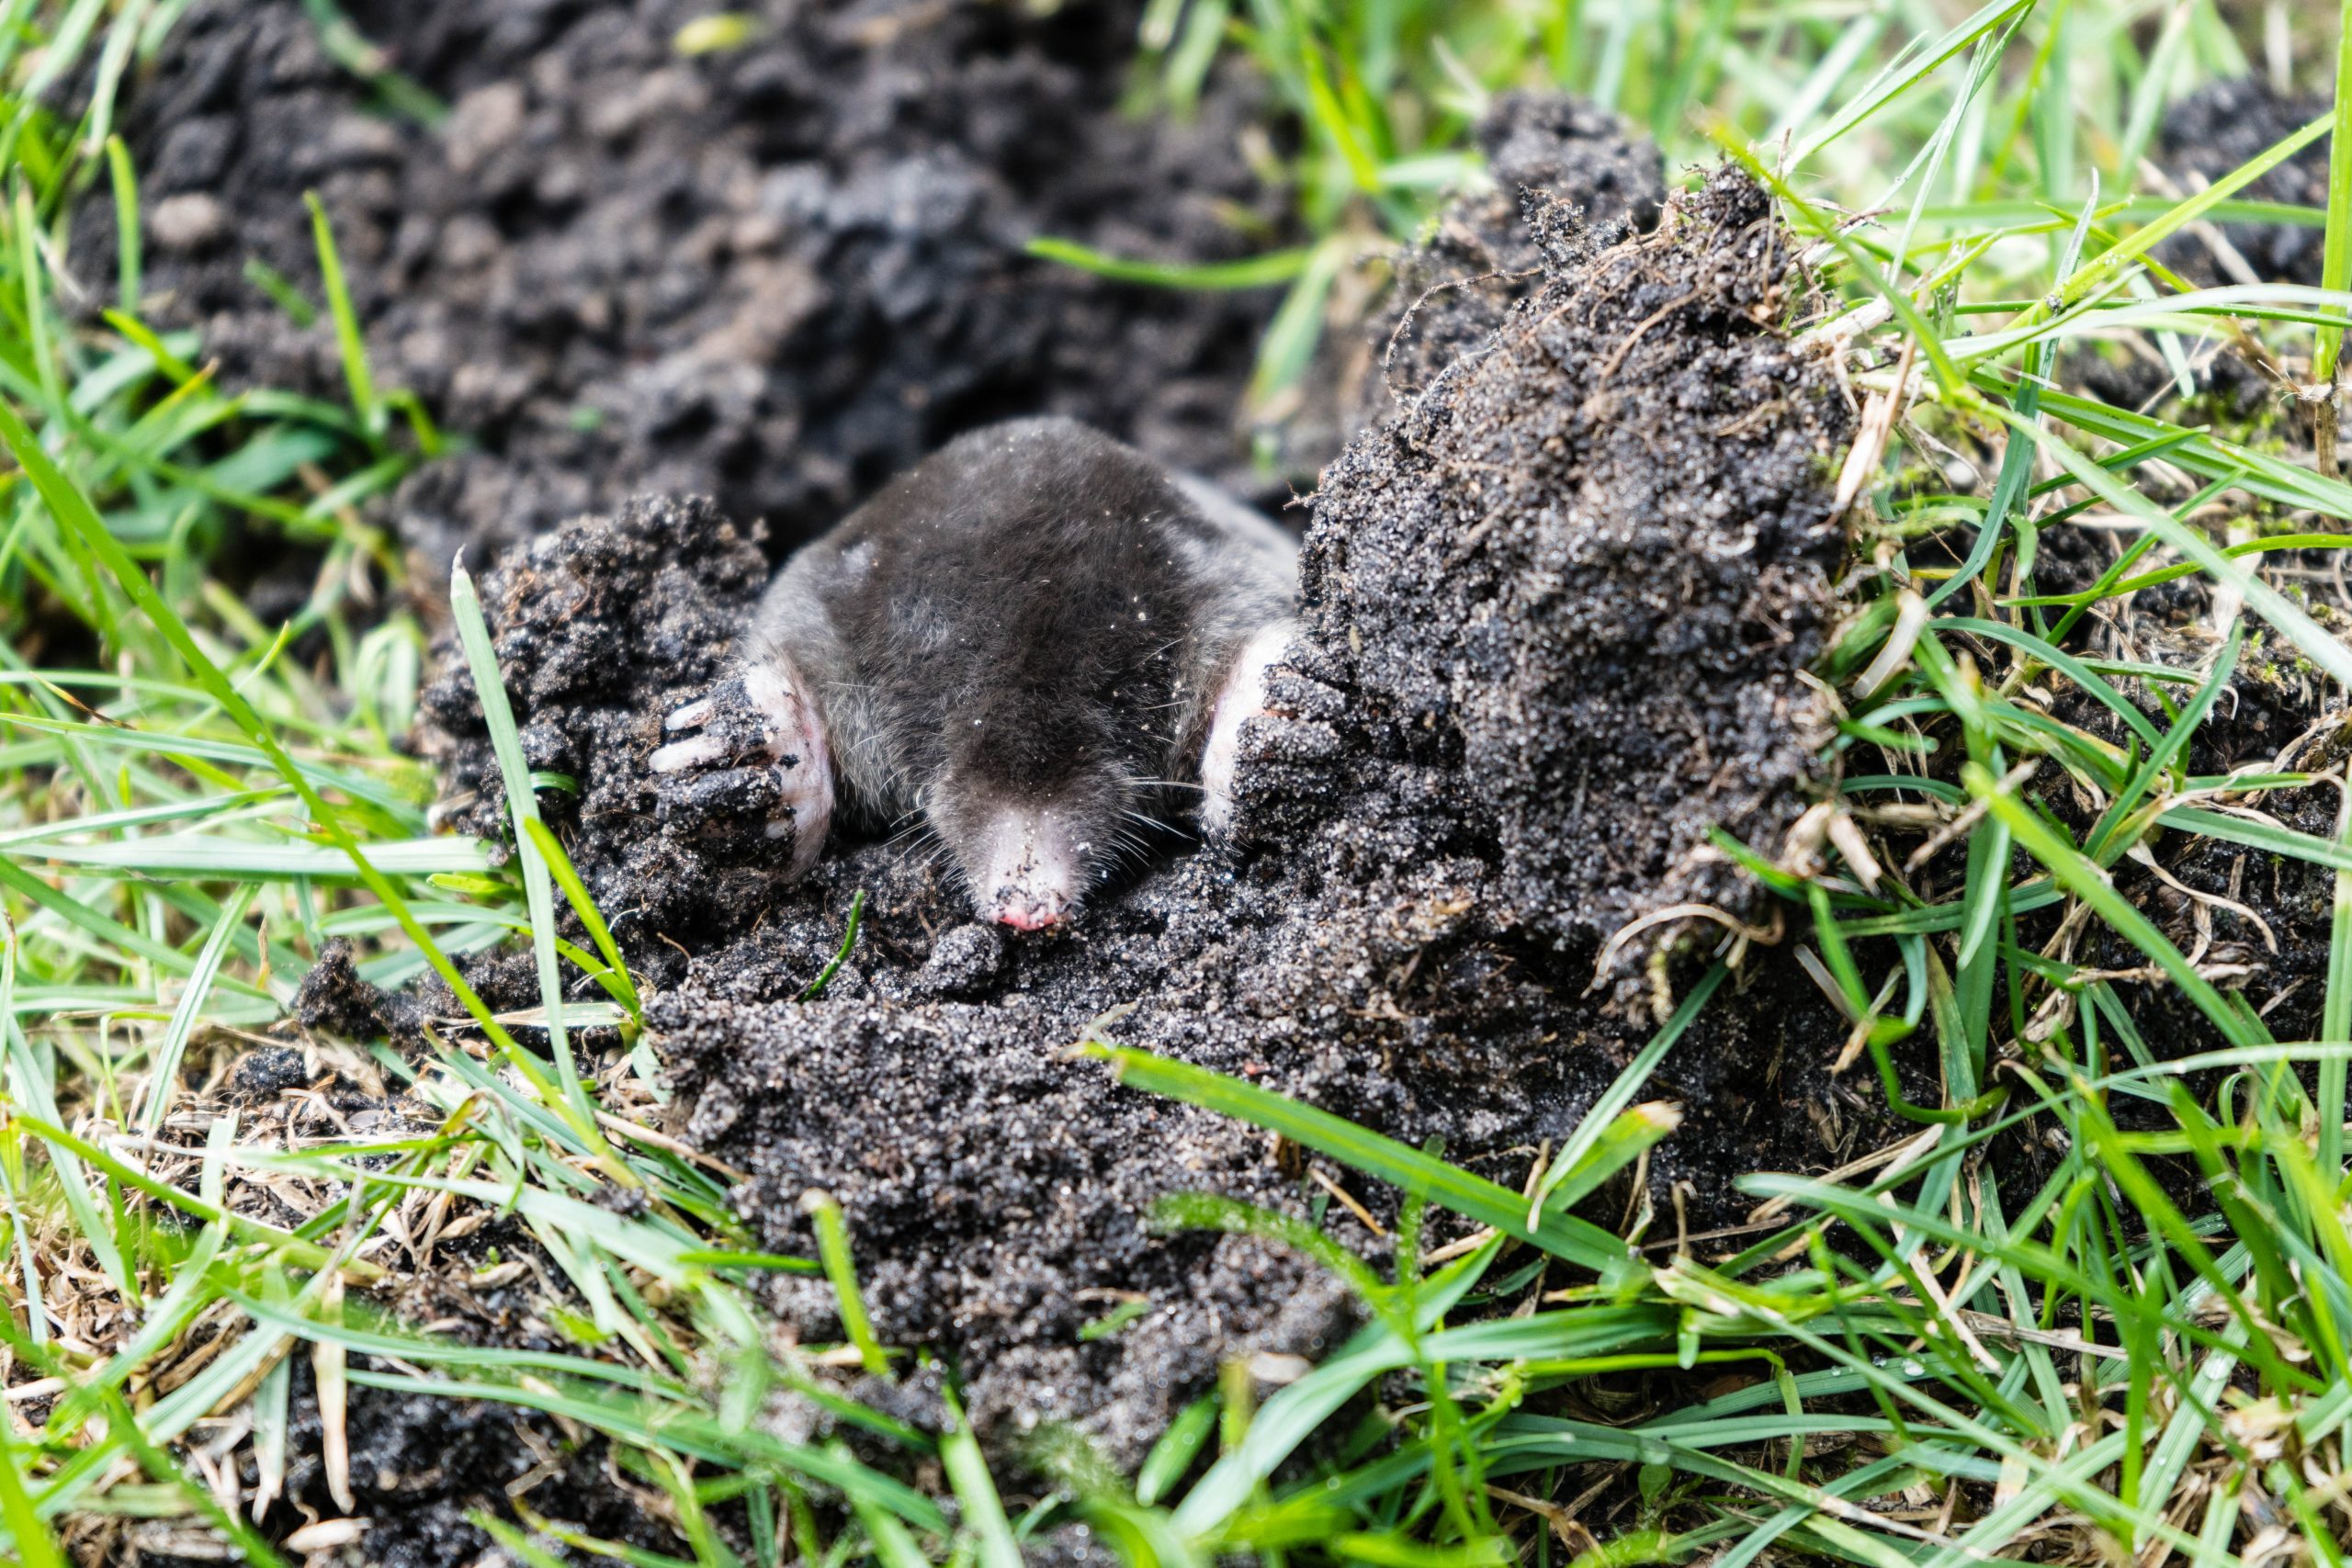 a mole comes from the earth